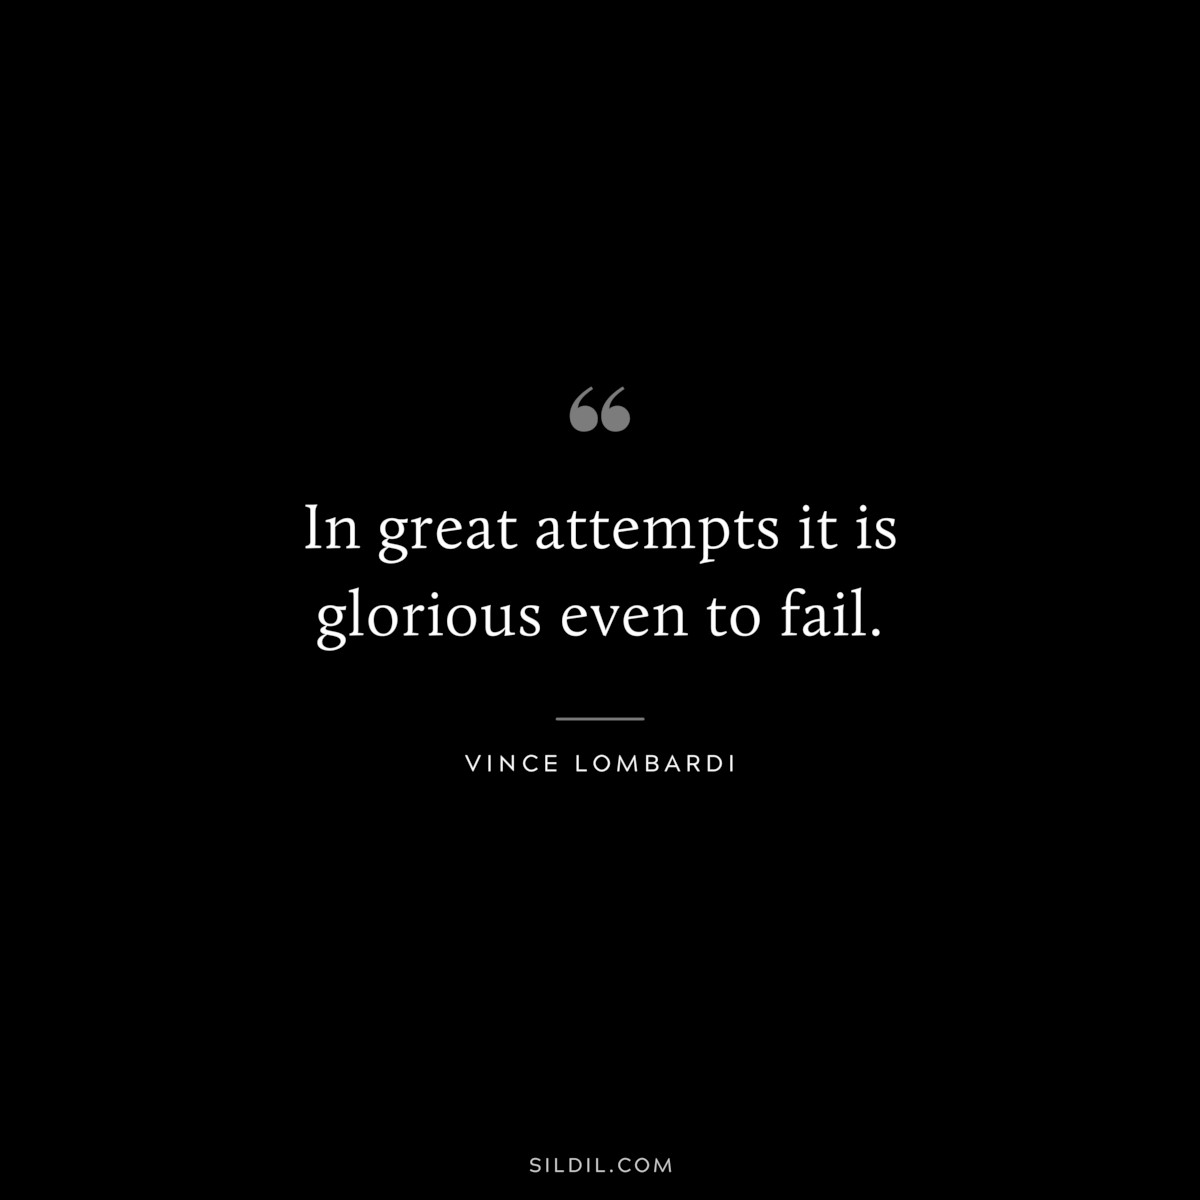 In great attempts it is glorious even to fail. ― Vince Lombardi